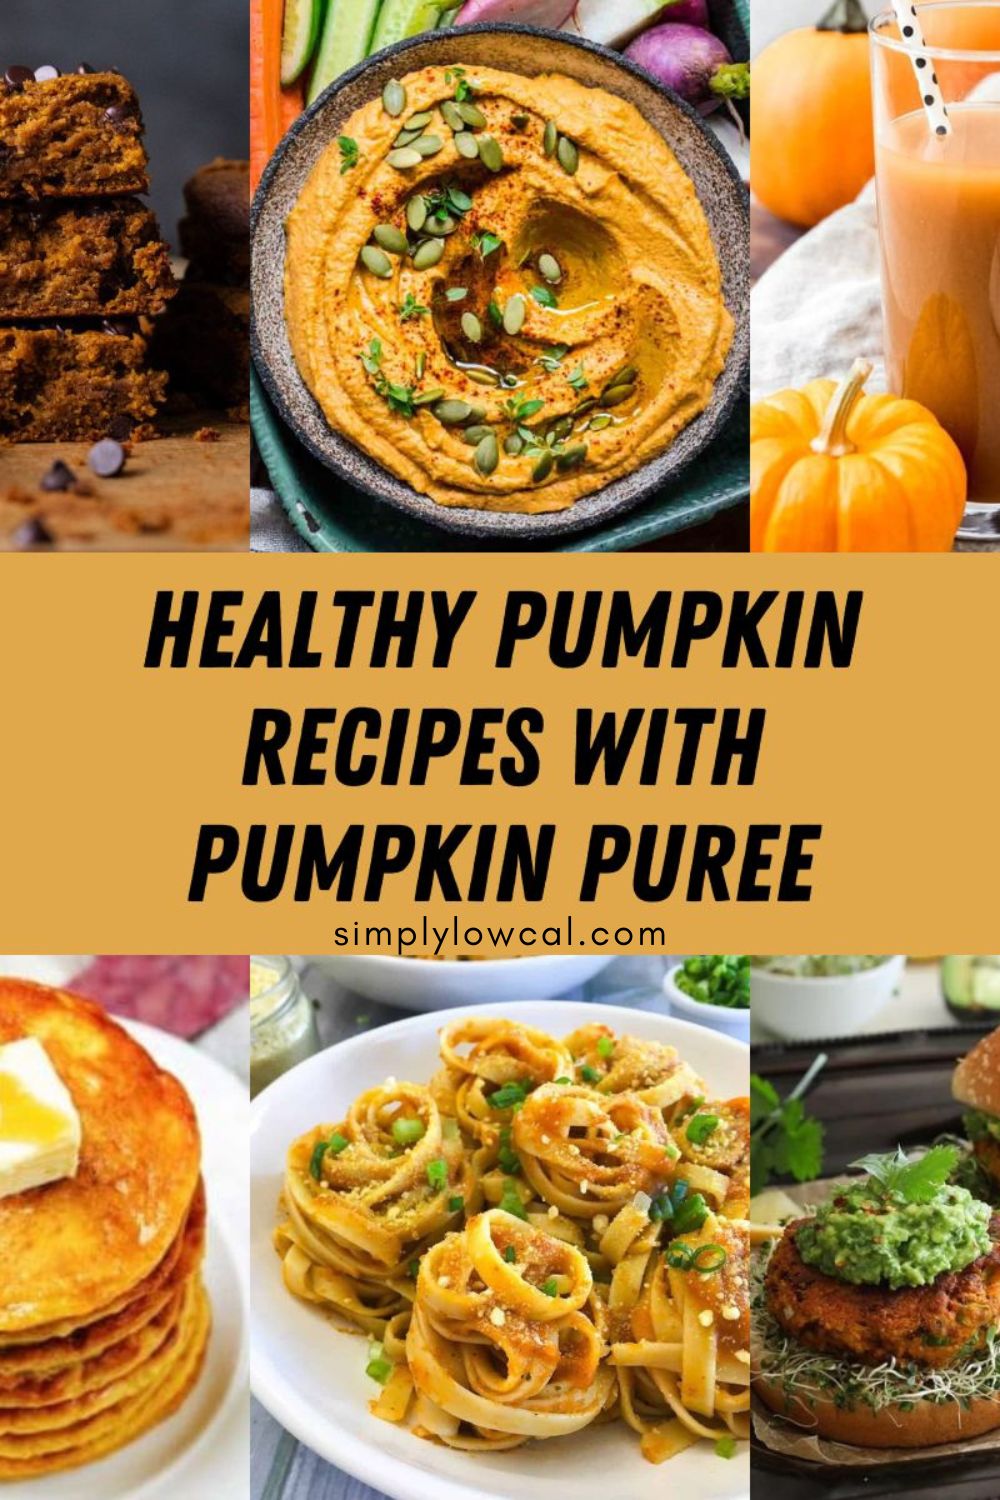 Pinterest pin of healthy recipes with pumpkin puree.